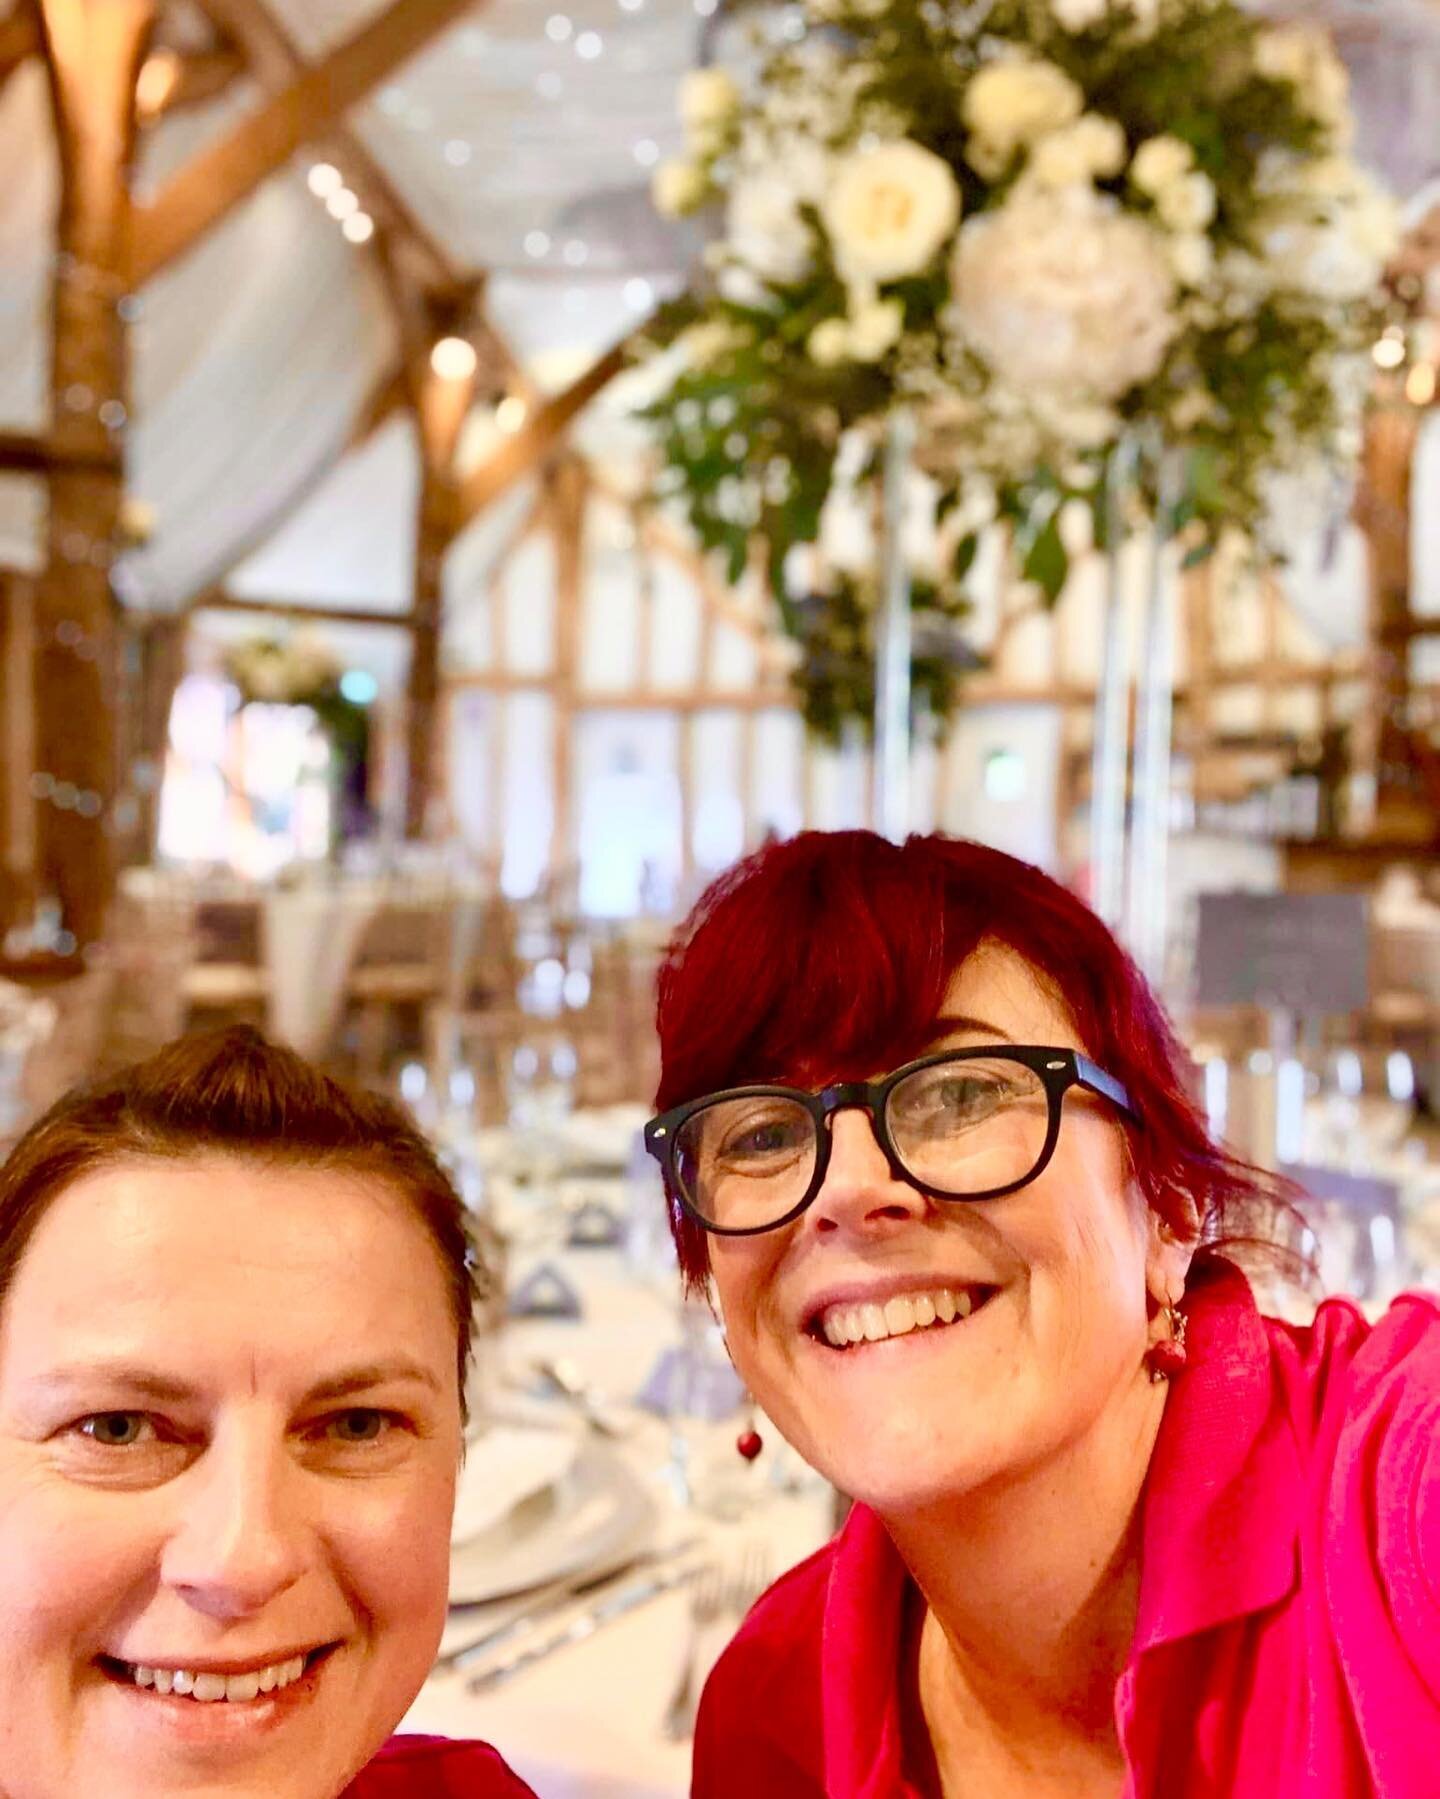 First wedding of the year completed yesterday at one of our favourite wedding venues @southfarm1🌻

The weather ended up perfect &amp; all the hard work worth it to receive a wonderful email this morning from our happy bride 🥰